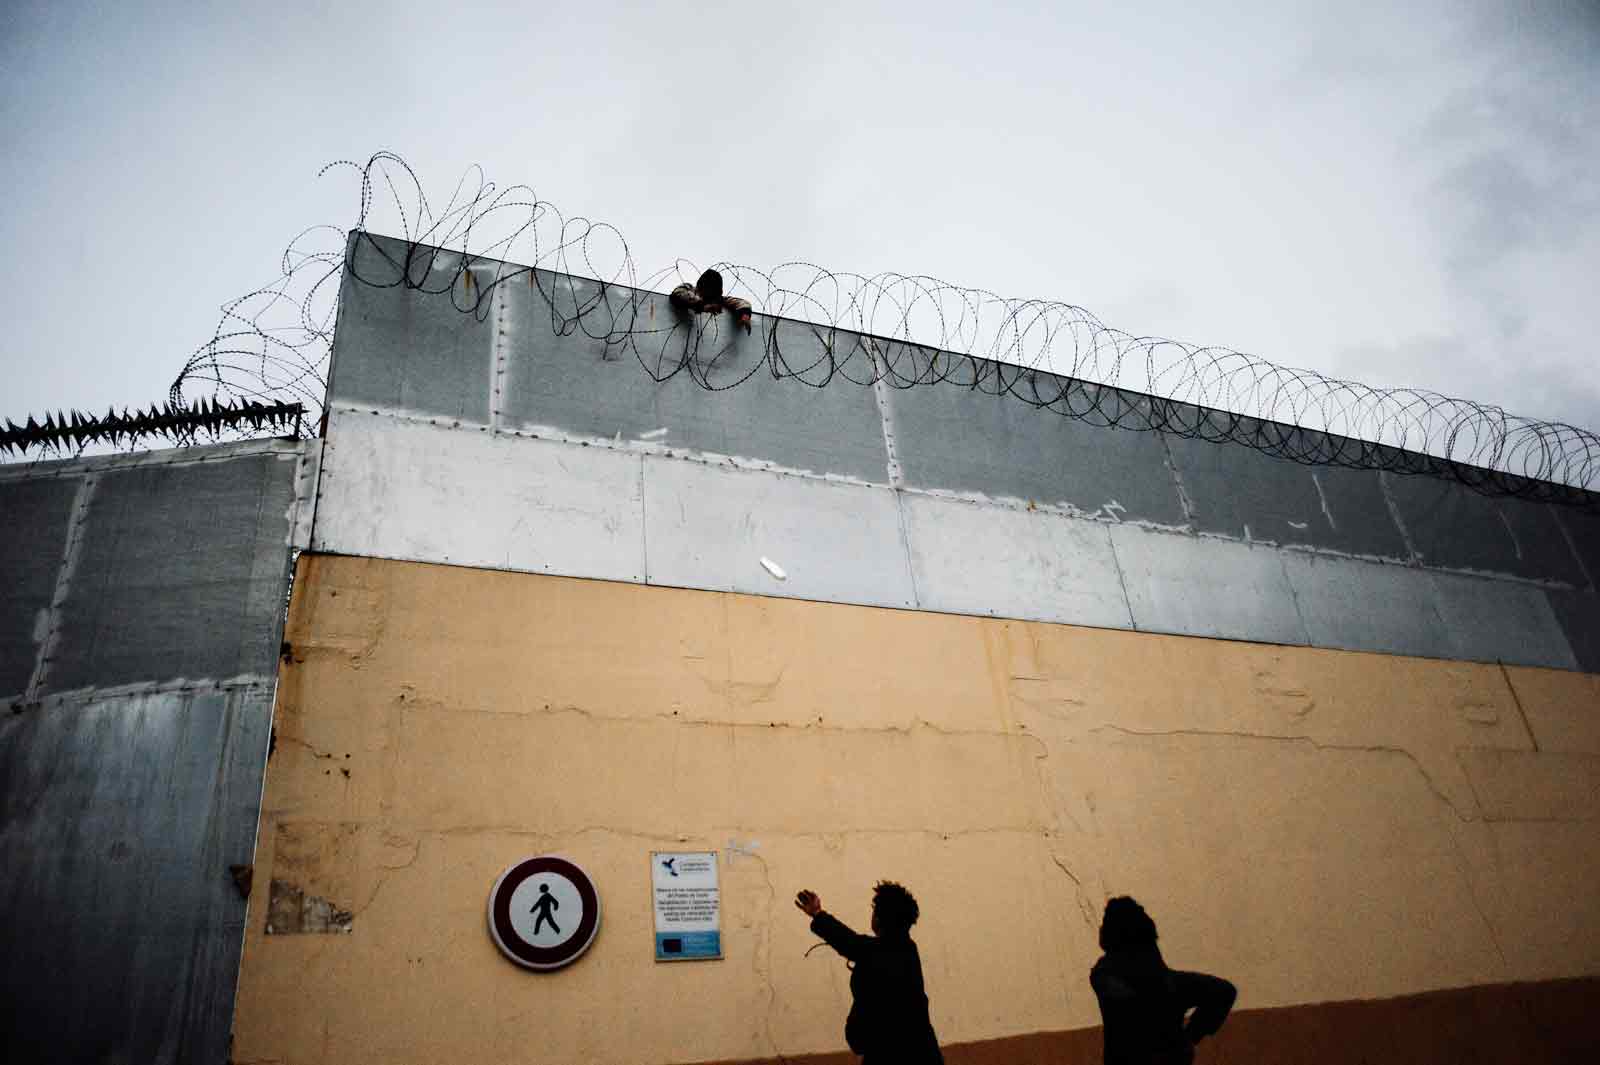 Moroccan minors who have managed to enter the Port of Ceuta and are waiting to attempt to board the ferries to Spain are thrown food by friends on the other side of the port's walls, Ceuta, February 20, 2019 